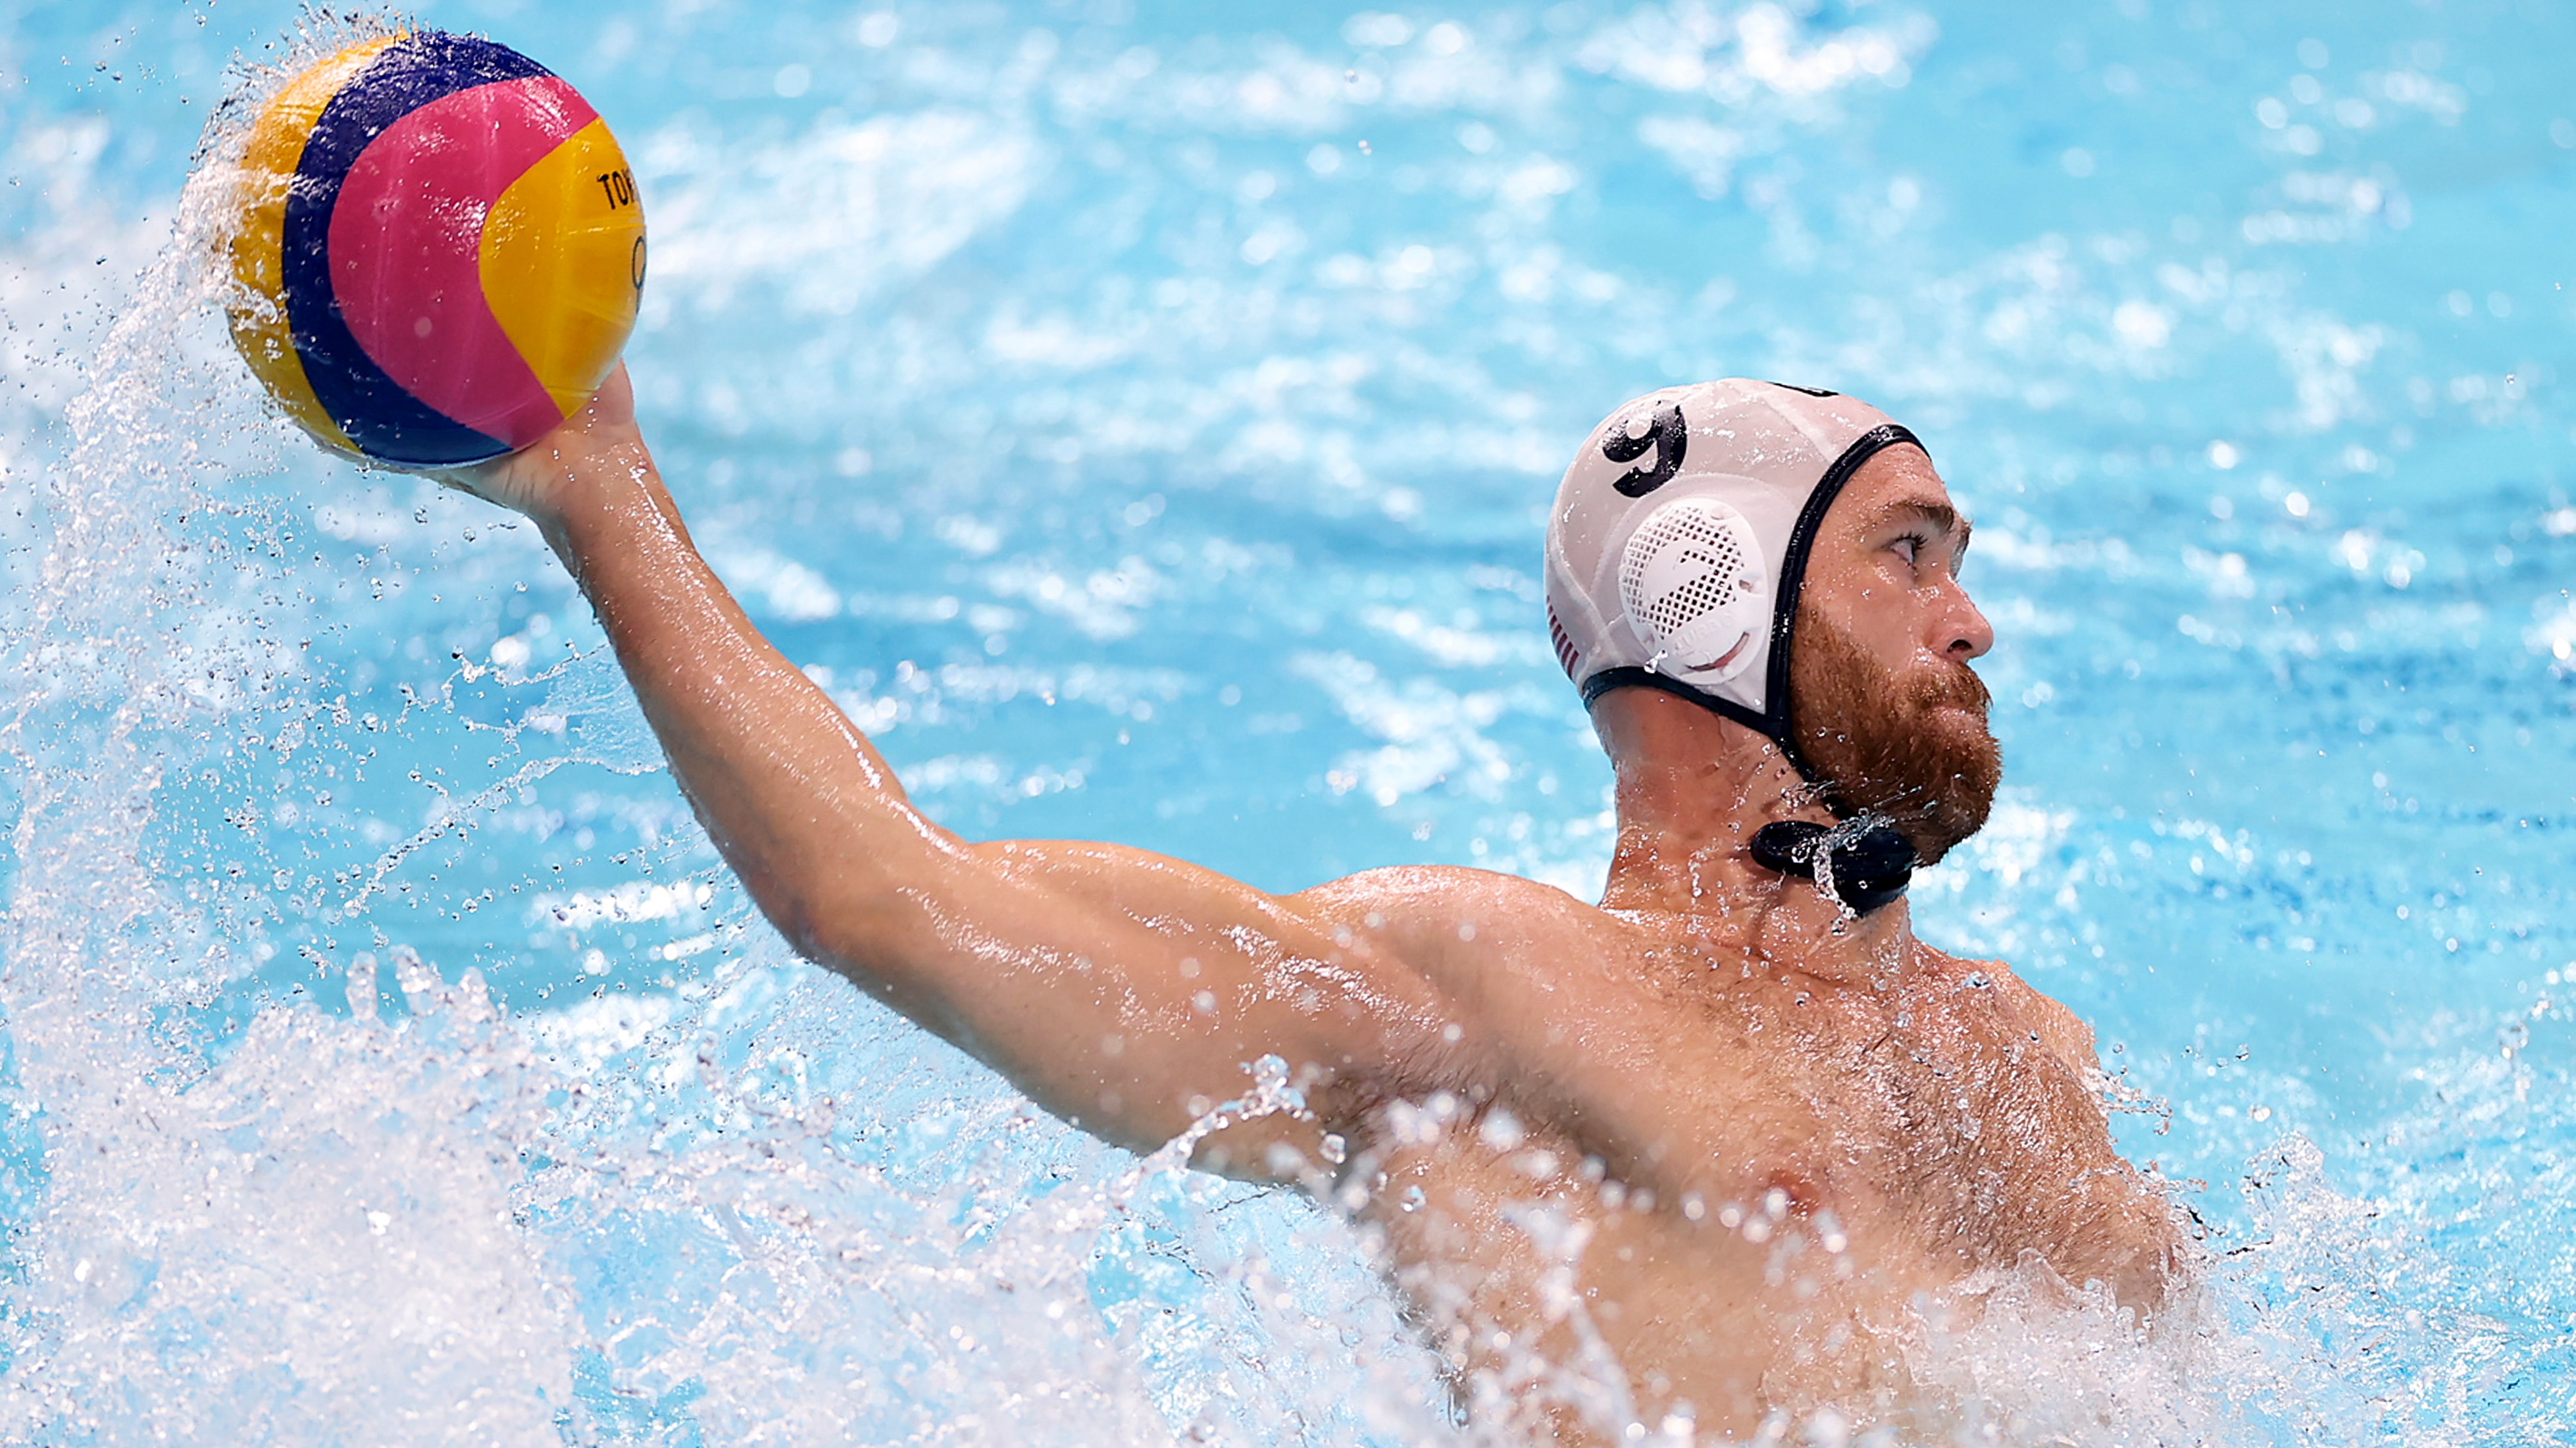 Team USA Can't Keep Up With Spain in Water Polo Quarterfinals